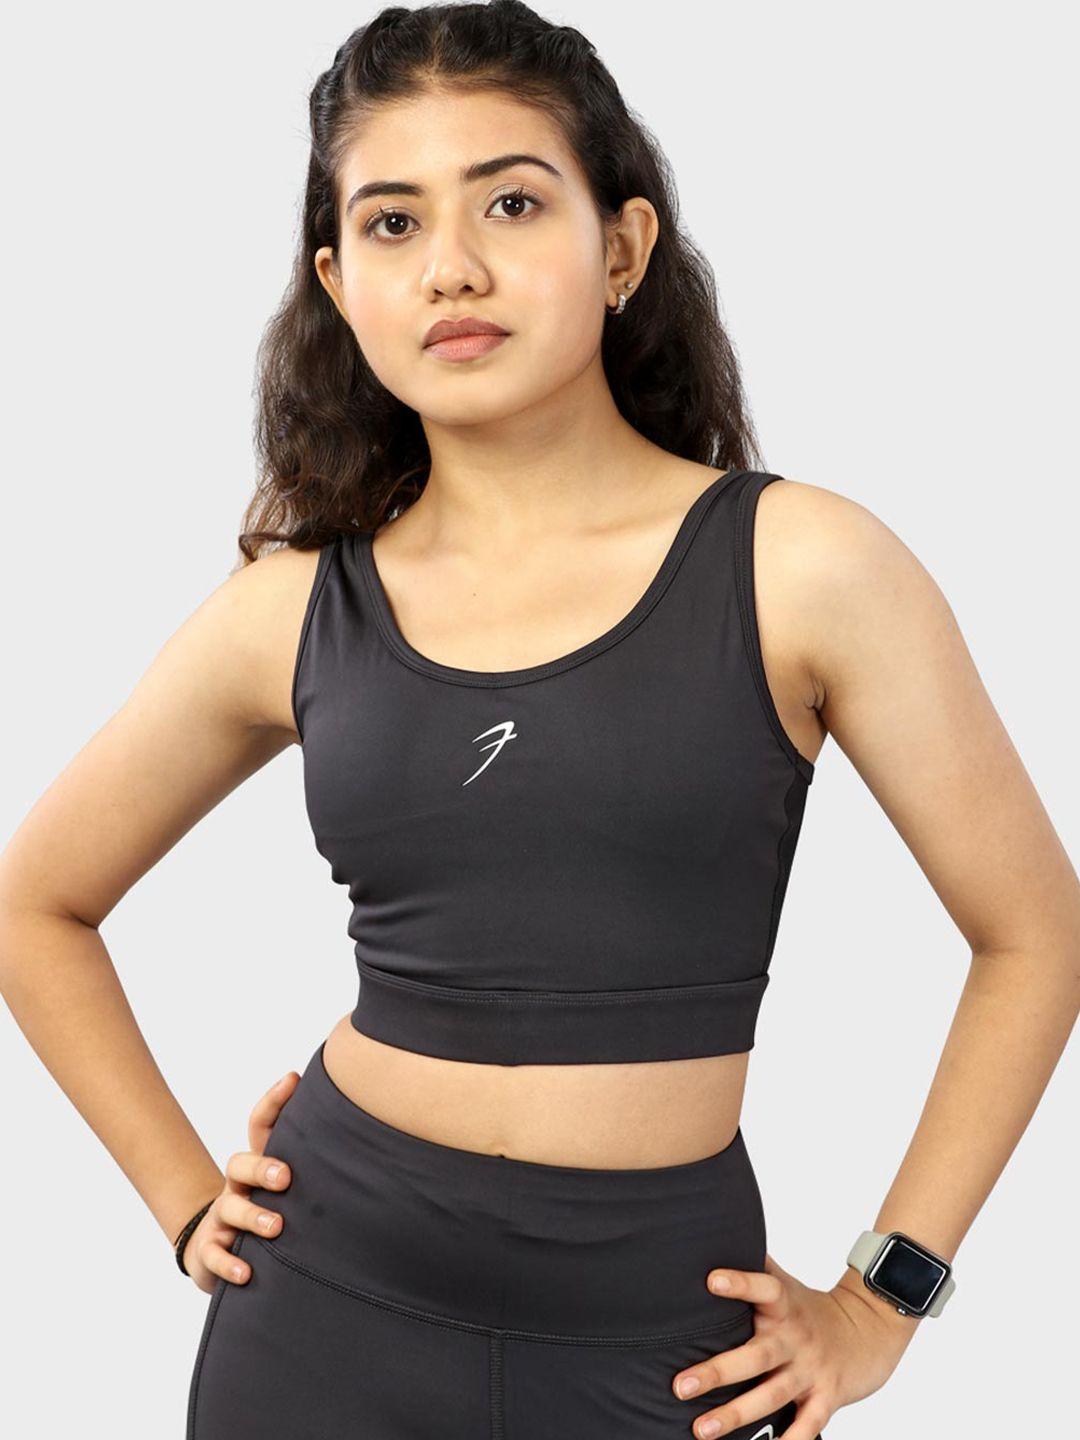 fuaark-padded-full-coverage-all-day-comfort-anti-odour-sports-bra